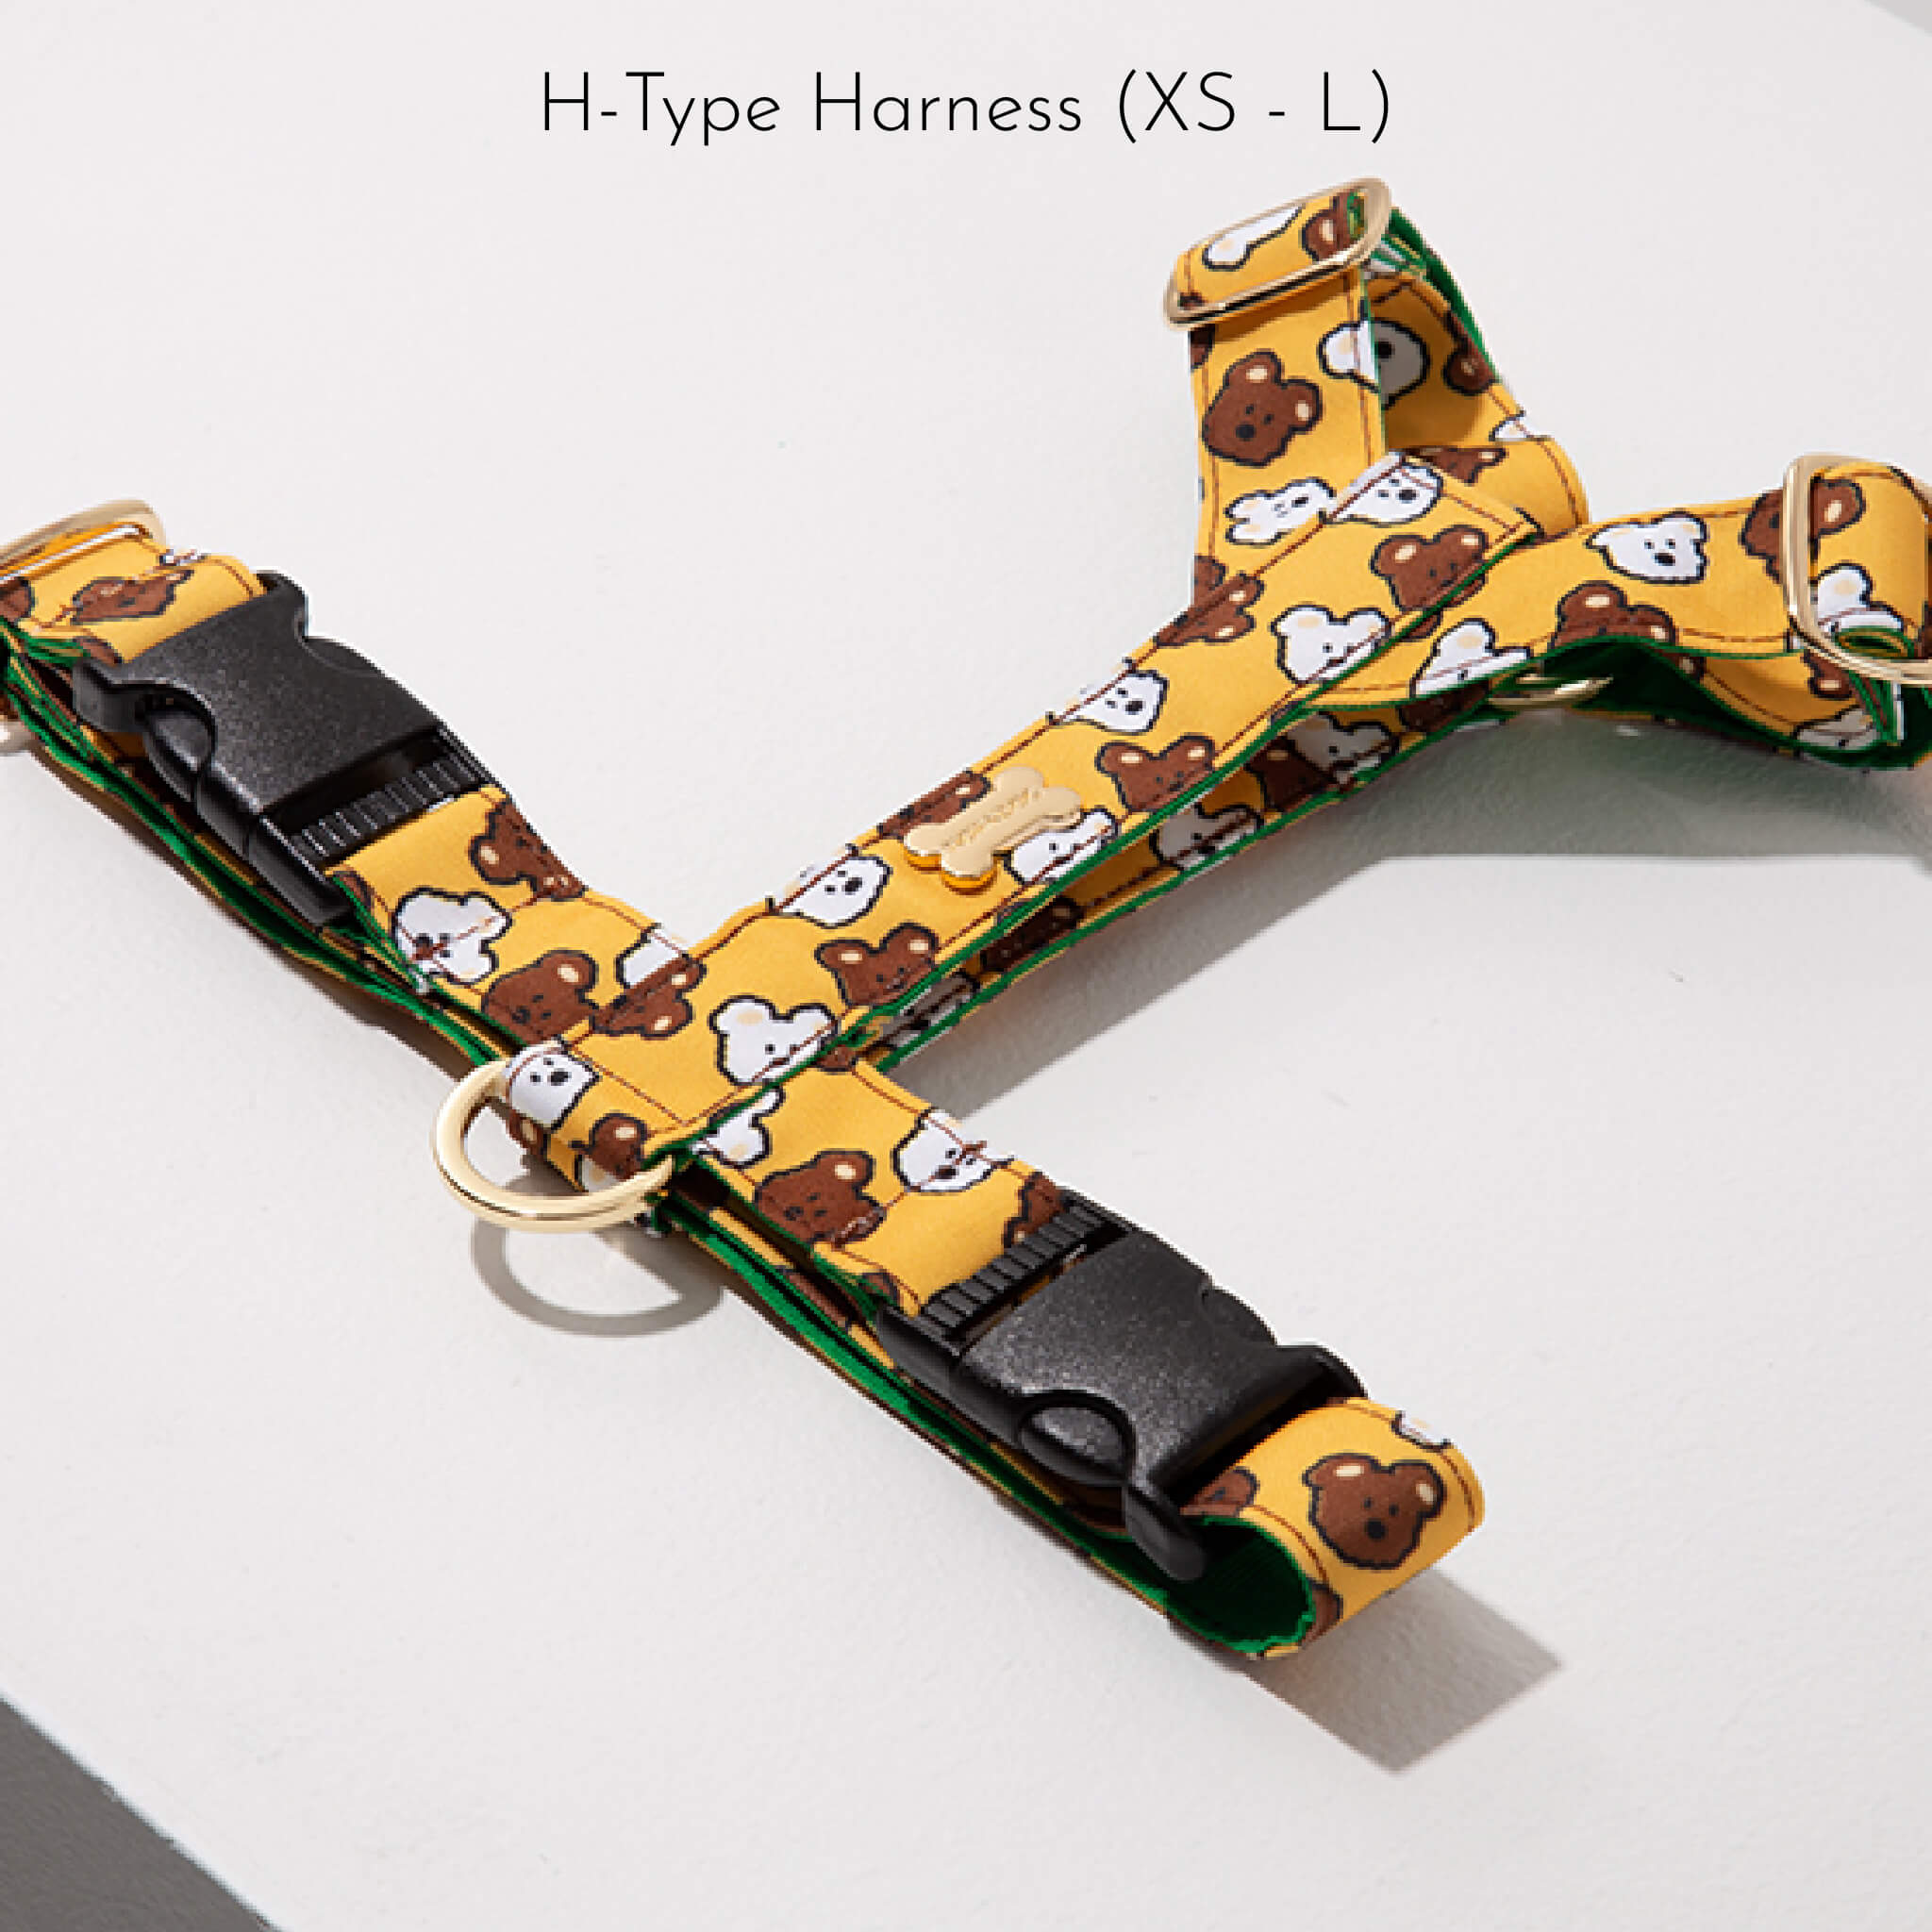 h-type harness